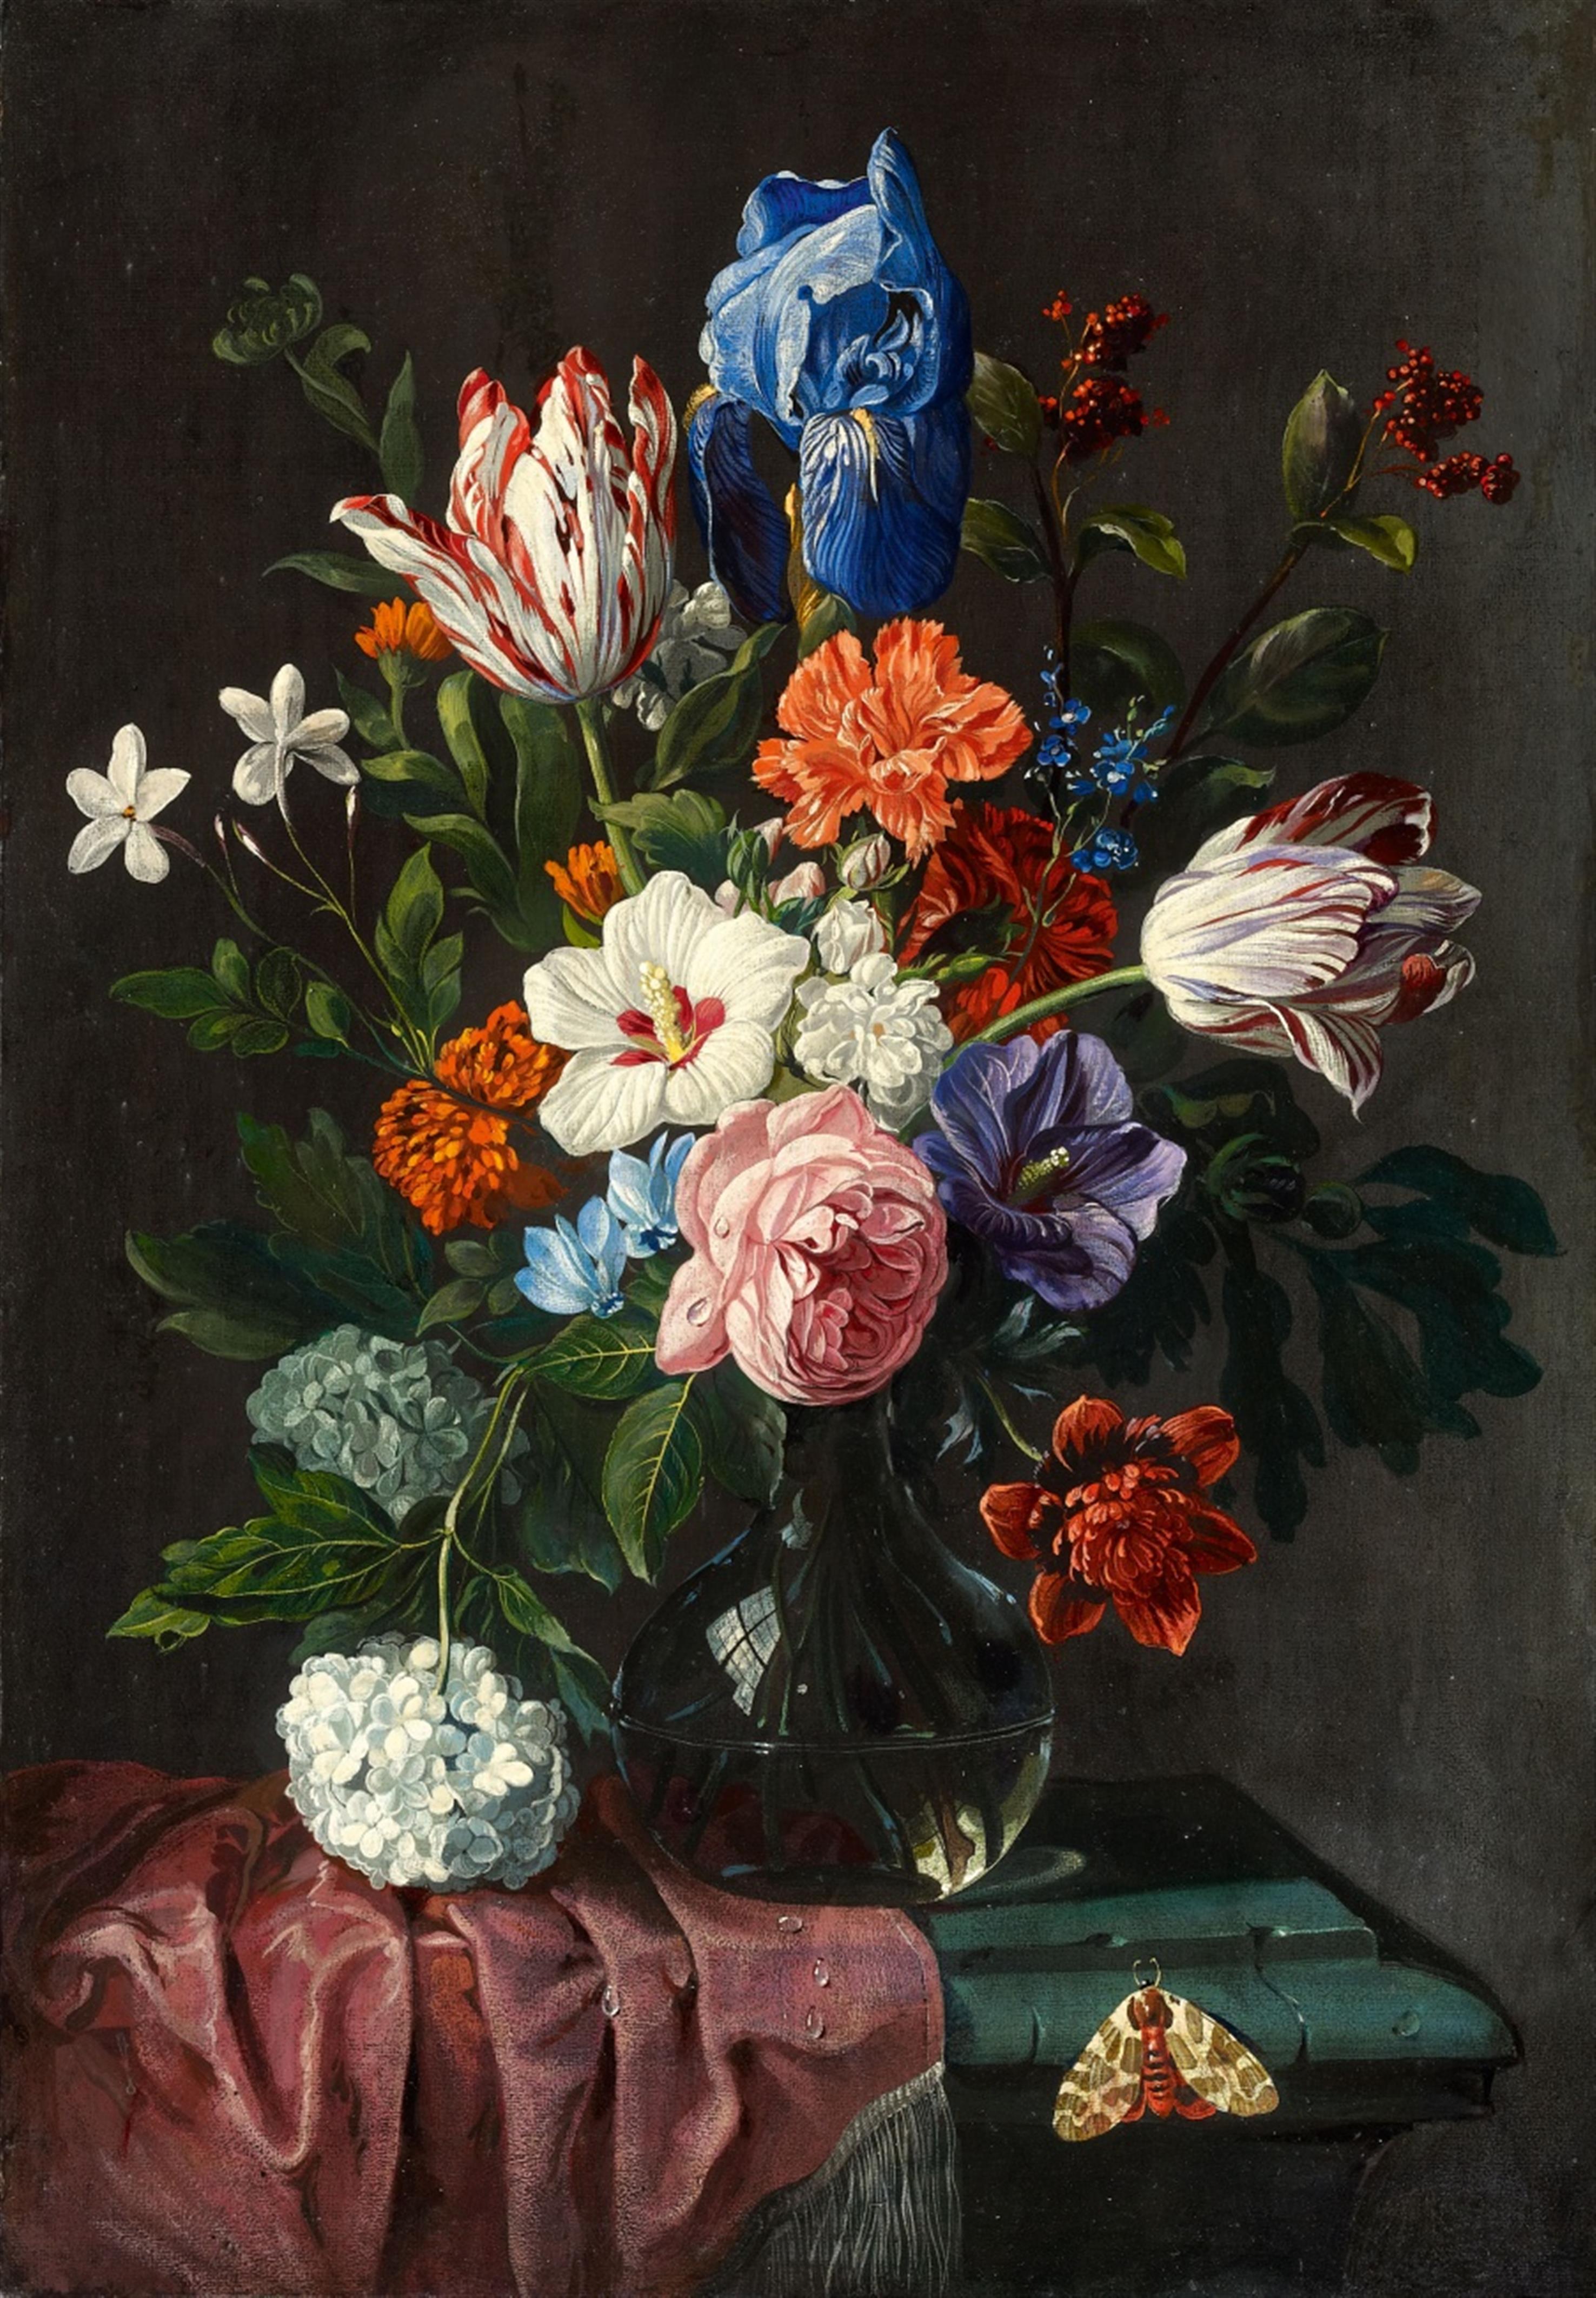 Netherlandish School 17th century - Floral Still Life with Tulips, Iris, Roses, Hydrangeas and a Butterfly - image-1